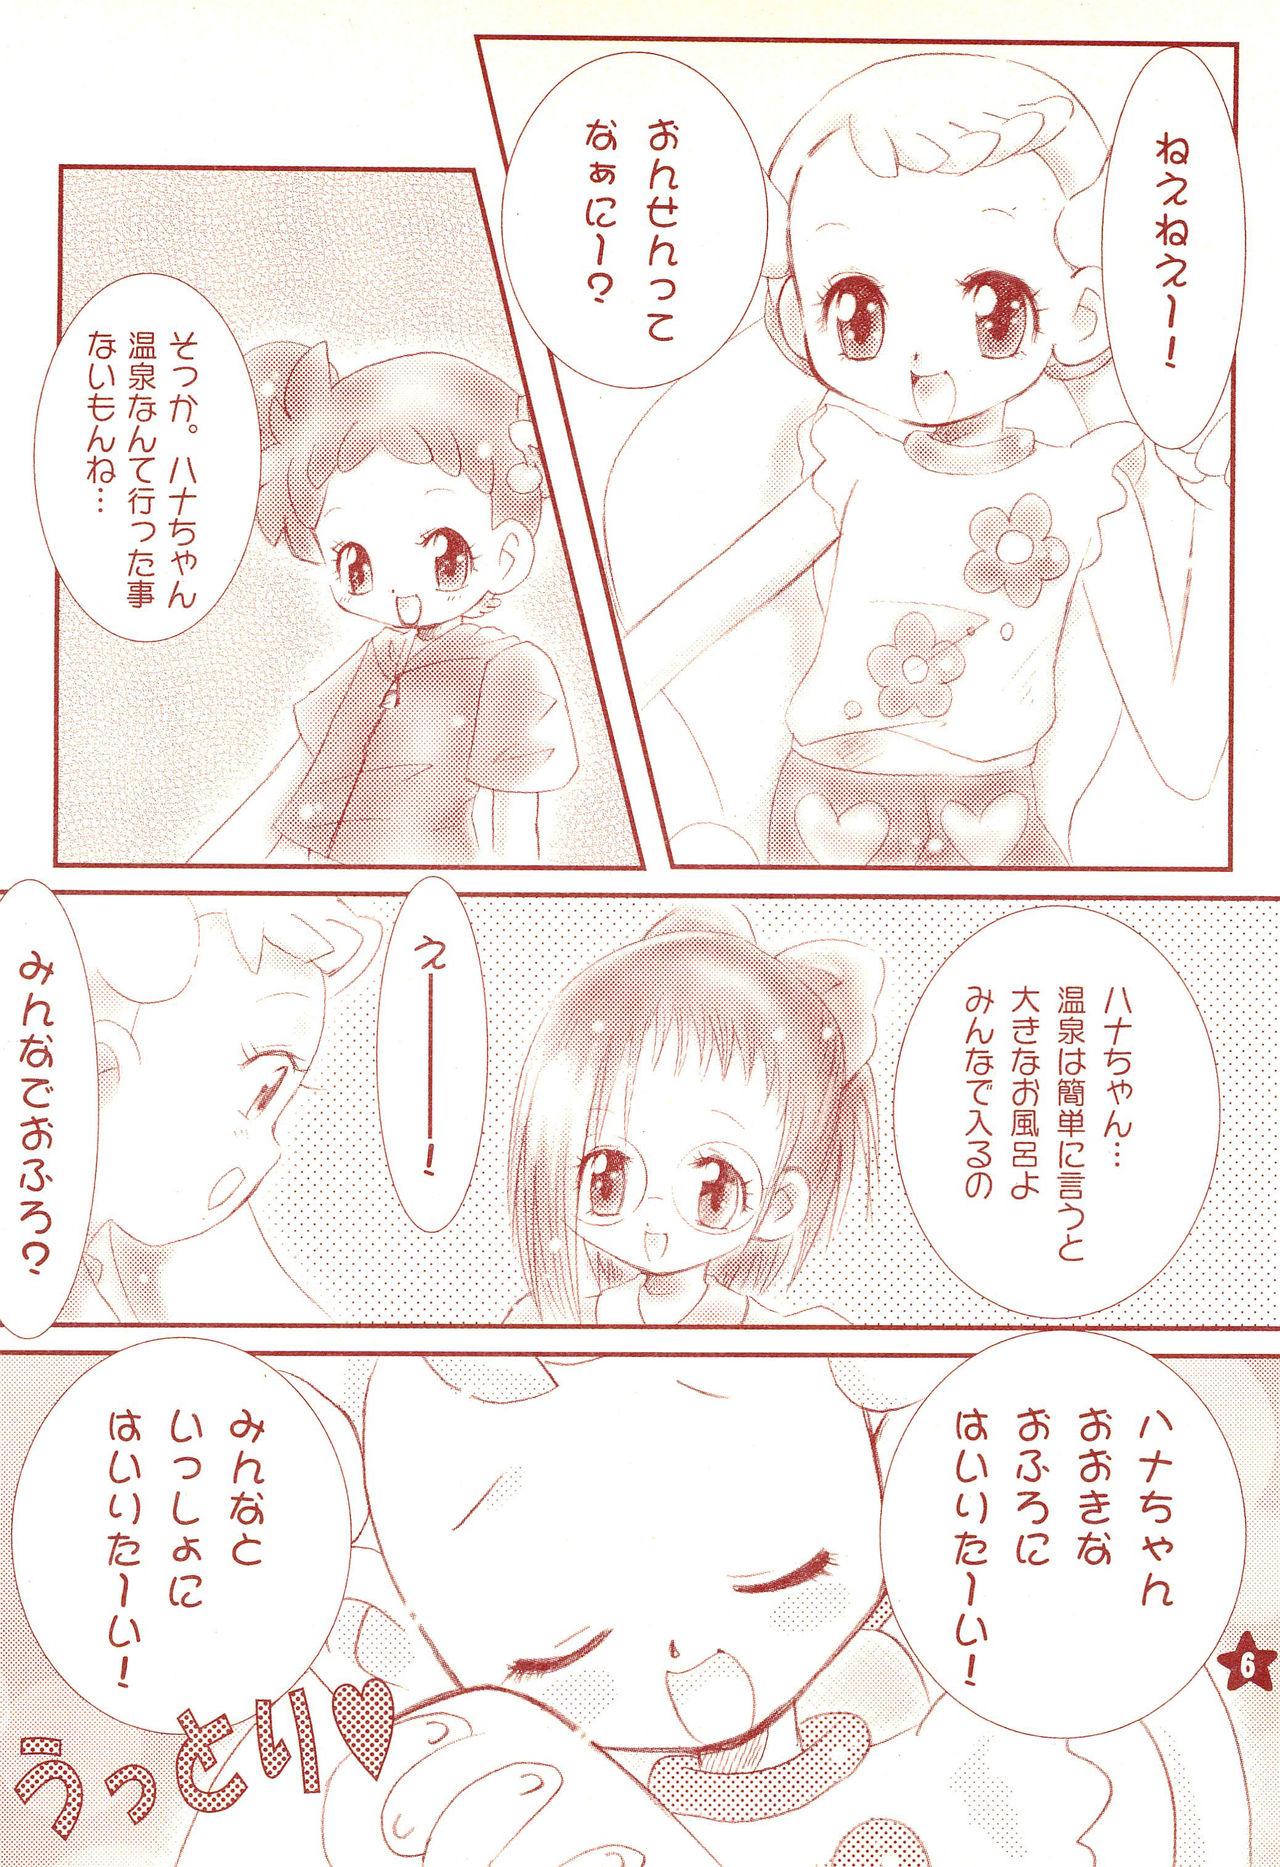 Whipping Friend - Ojamajo doremi | magical doremi Adult Toys - Page 8